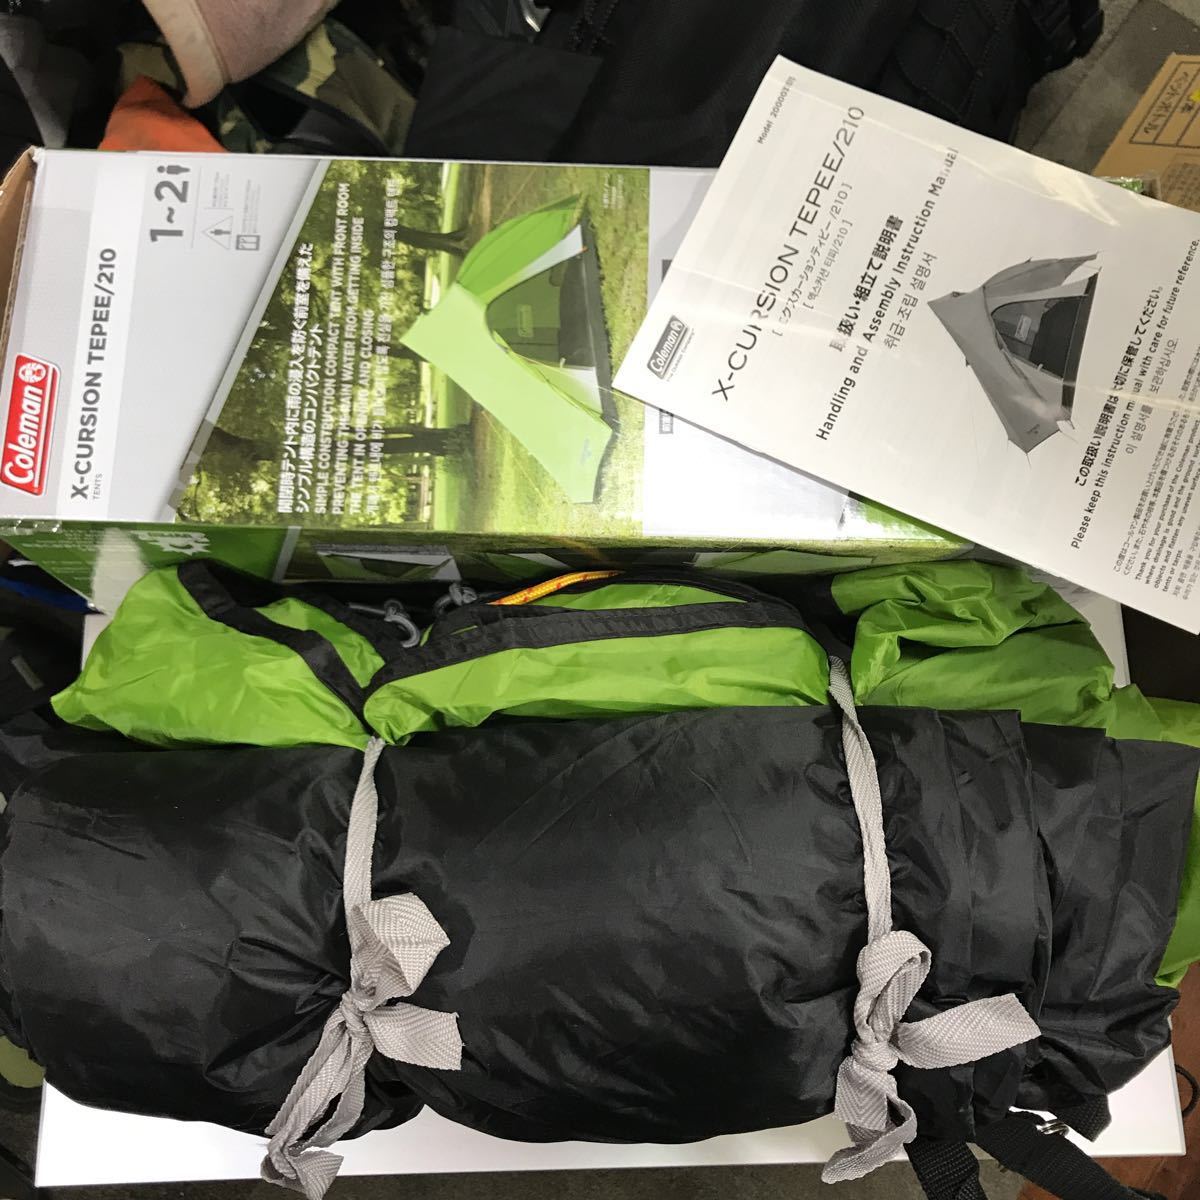 Coleman One Paul Tent Excursion Tipy 210僅使用過一次 原文:コールマンワンポールテント エクスカーションティピー210 1回使用のみ